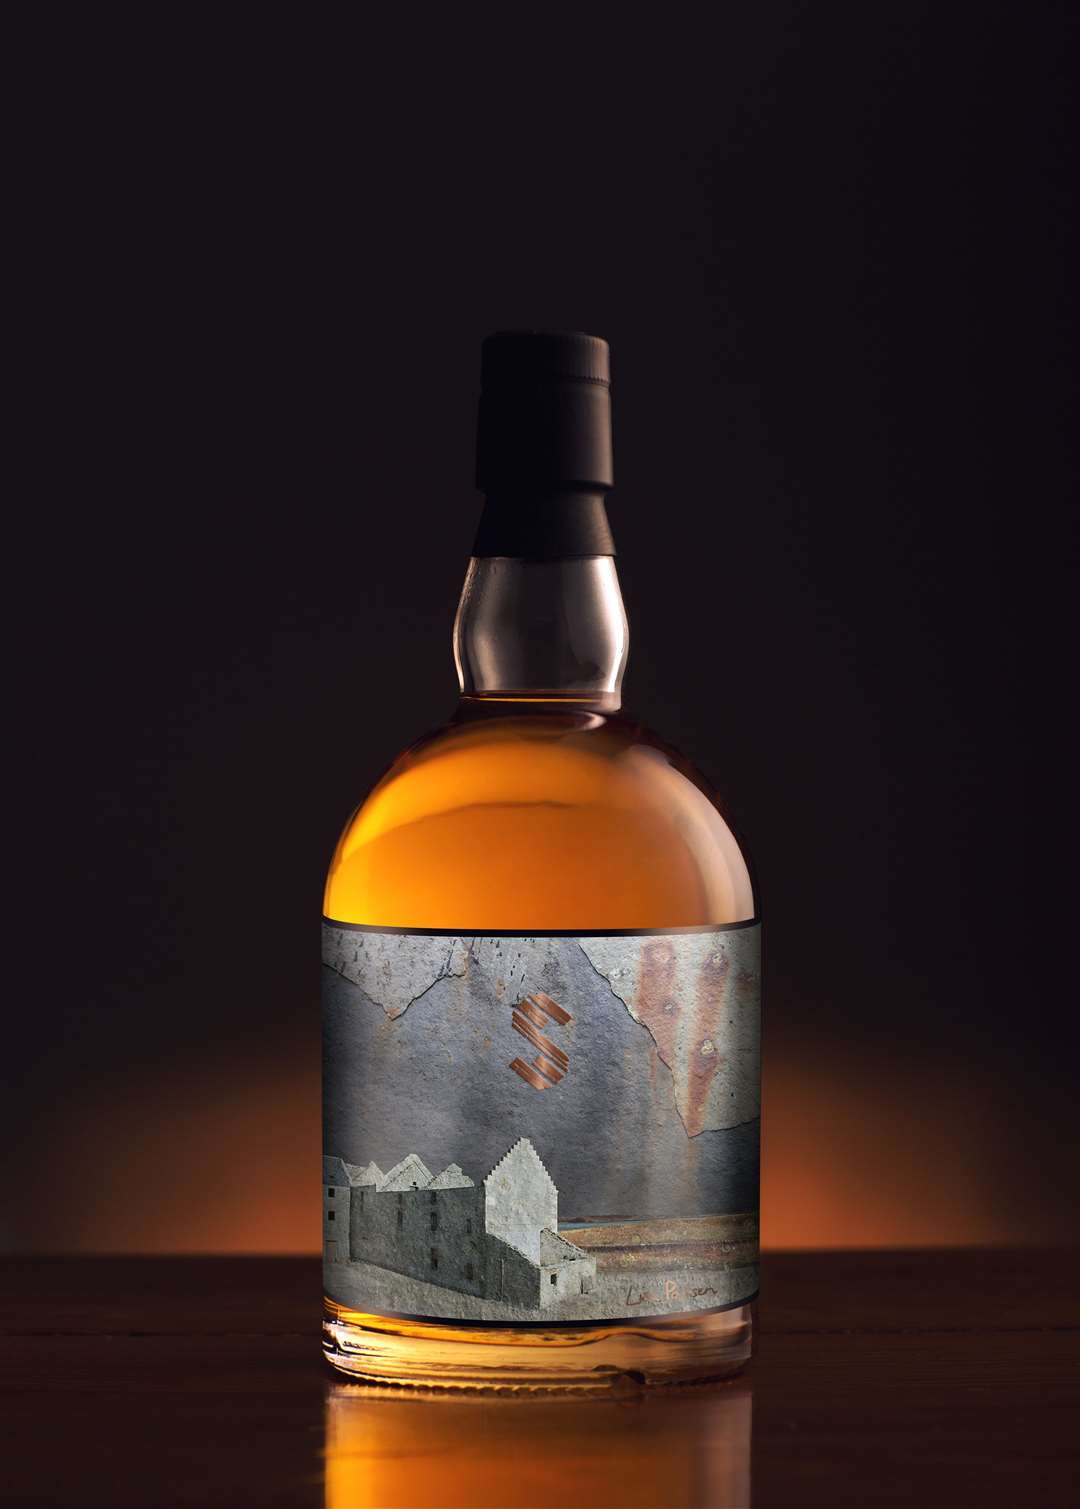 An exclusive bottle of the 1818 edition of Stannergill Whisky will be pre-sold for £750.